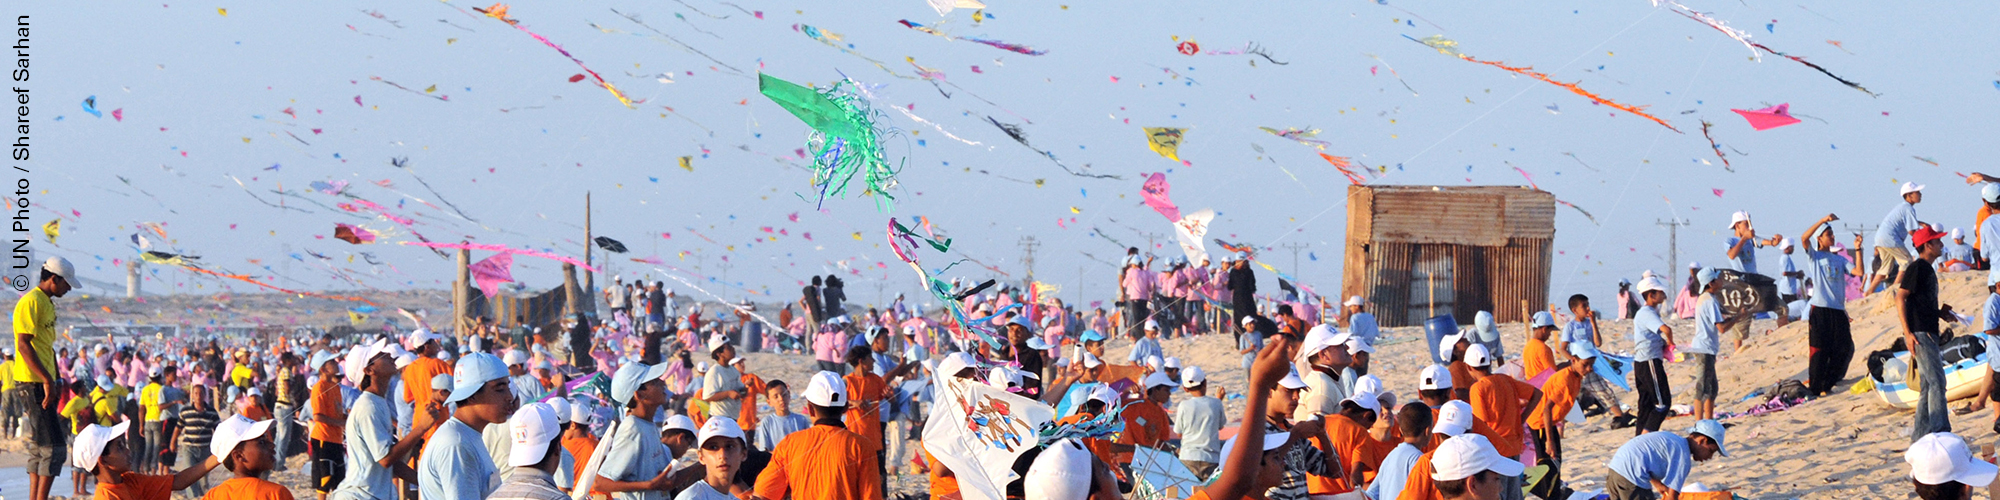 Many people flying kites on a wide open ground